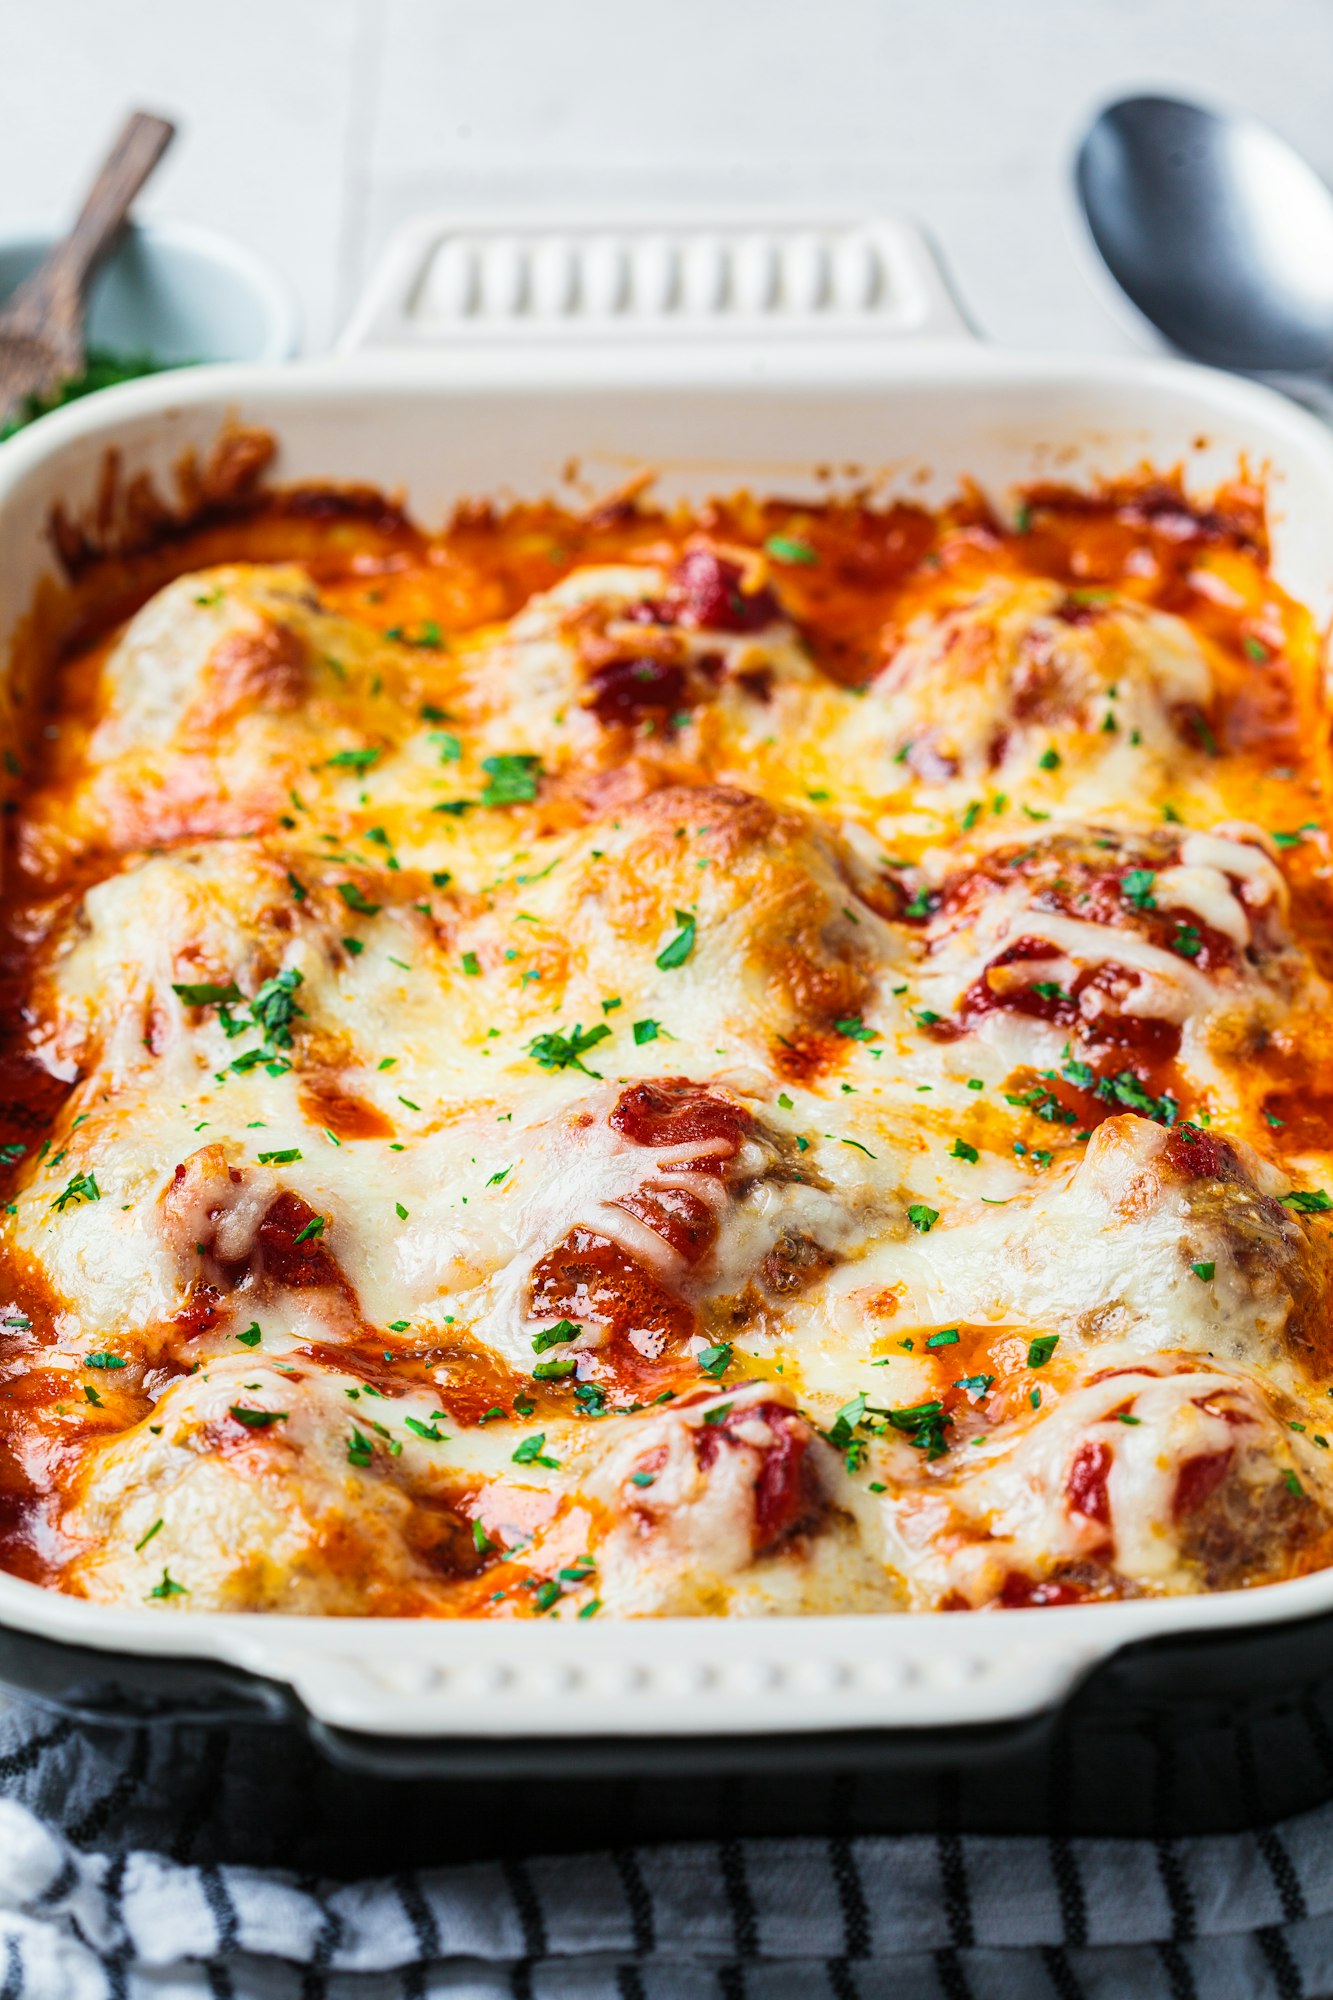 Closeup of baked cheesy meatballs casserole with tomato sauce in the oven dish.